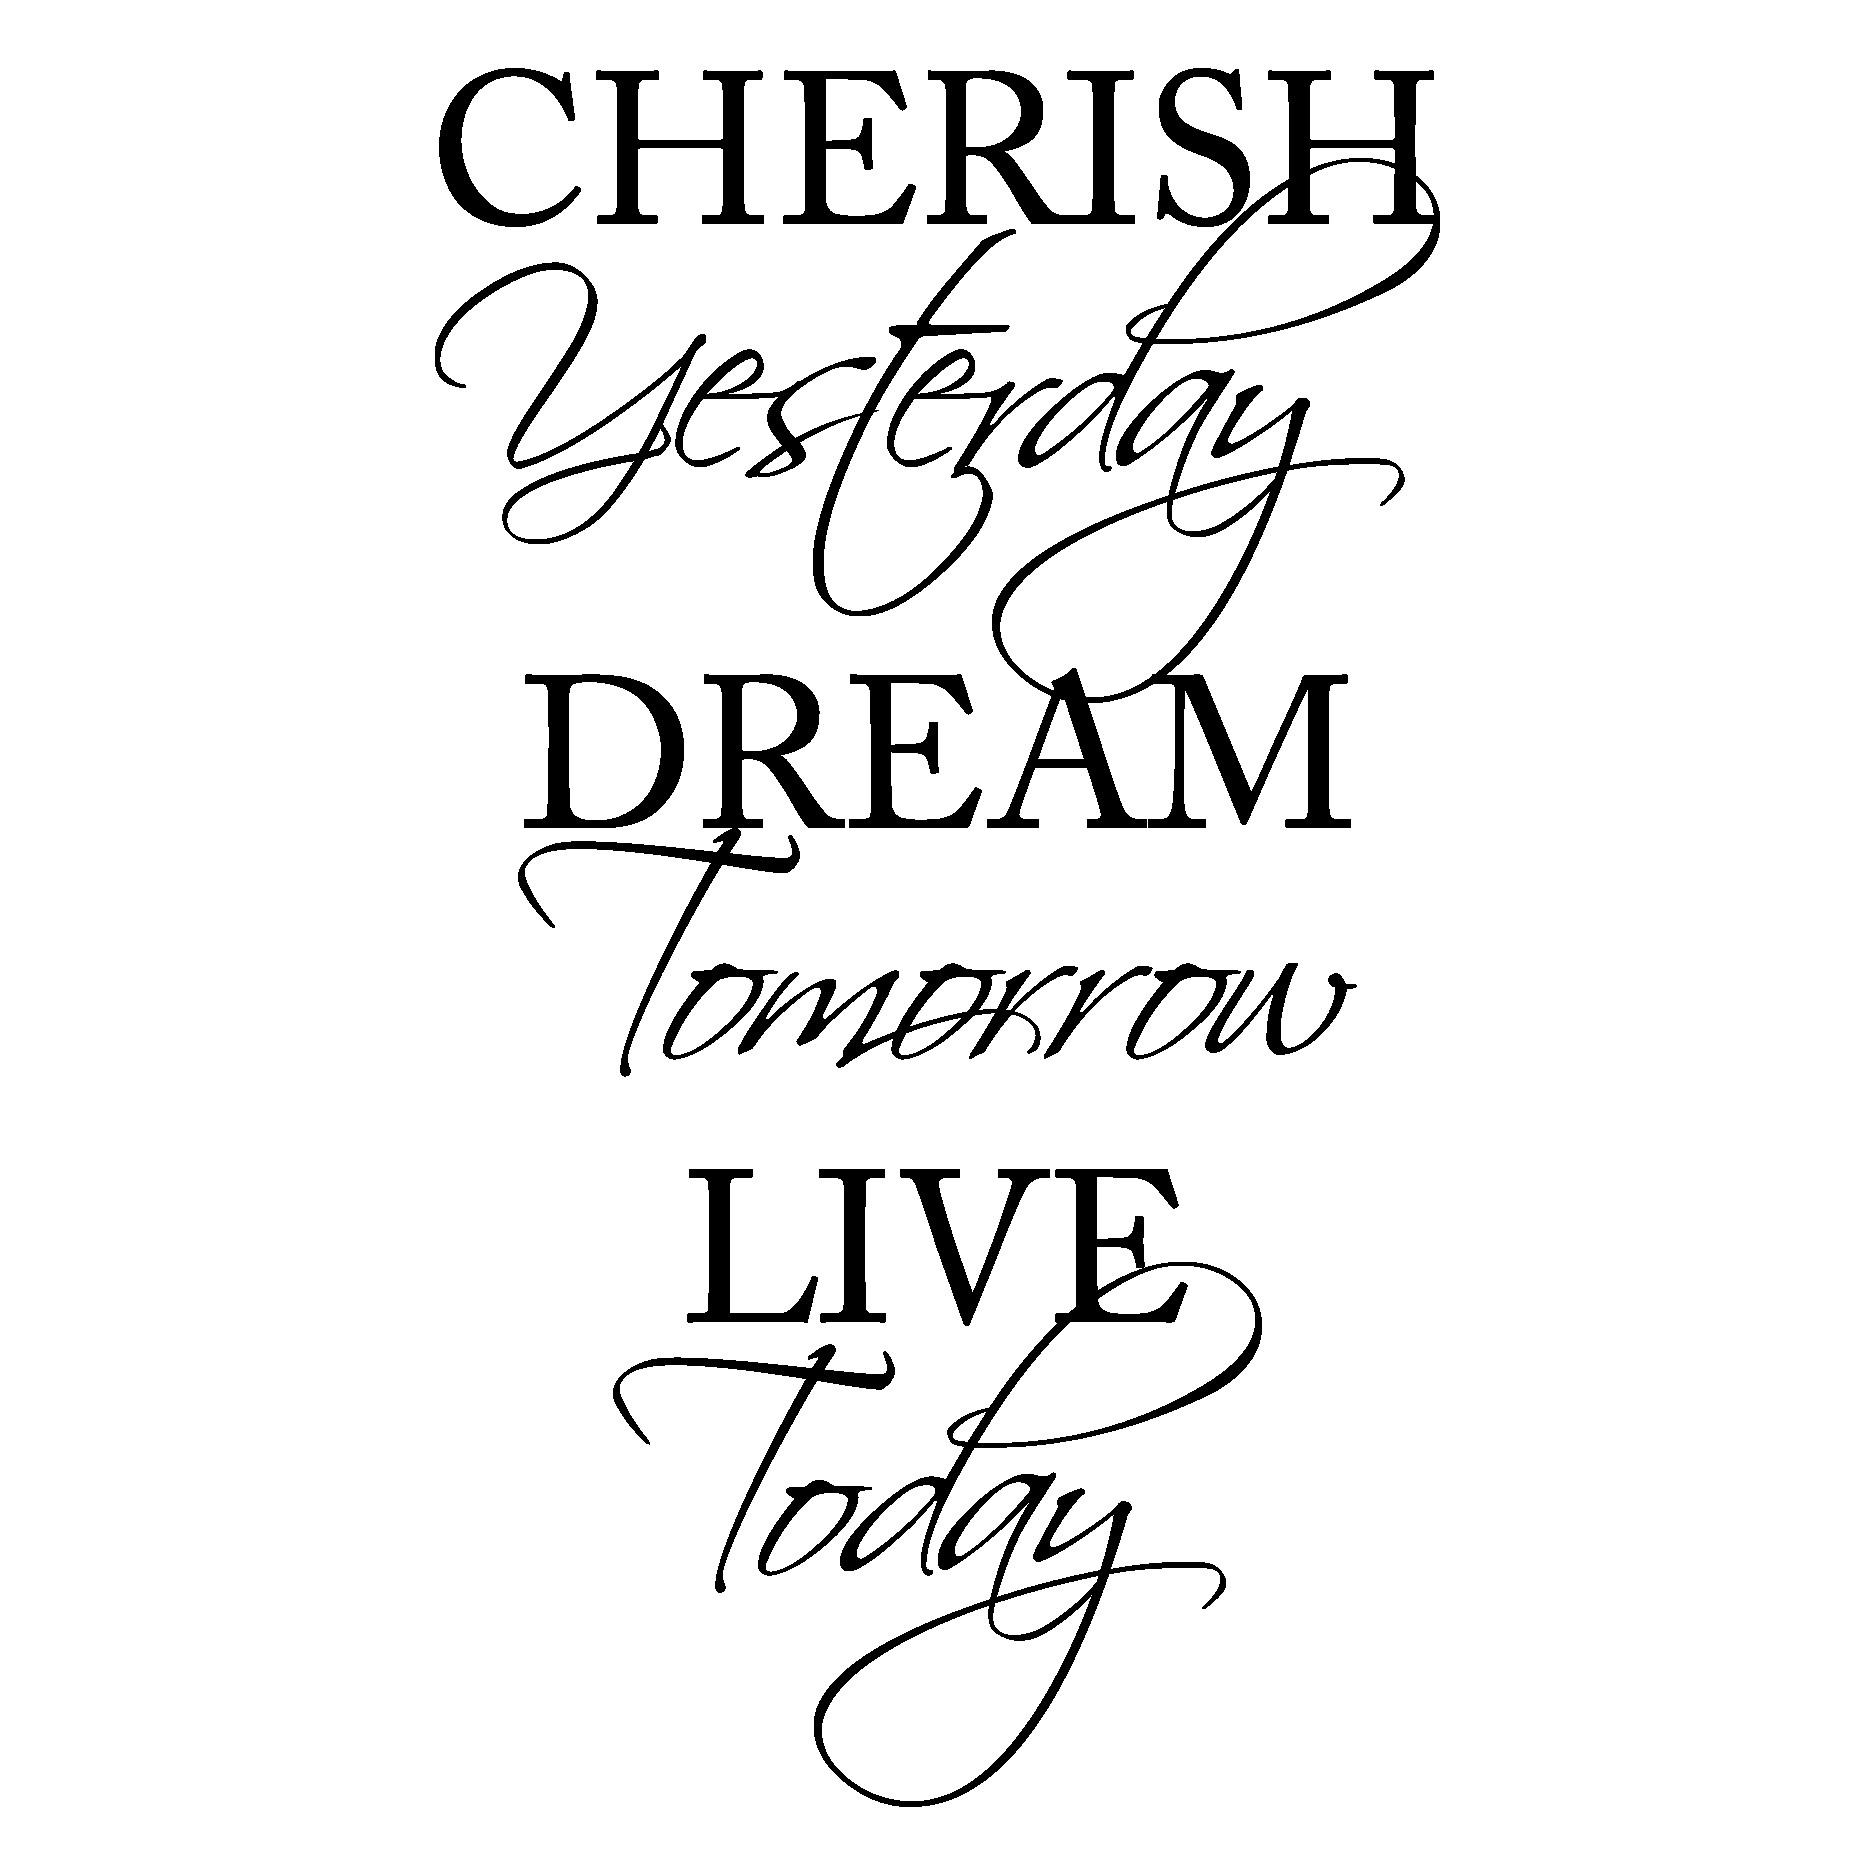 Inspirational Quotes Svg
 Cherish Yesterday Dream Tomorrow Live Today Wall Quotes